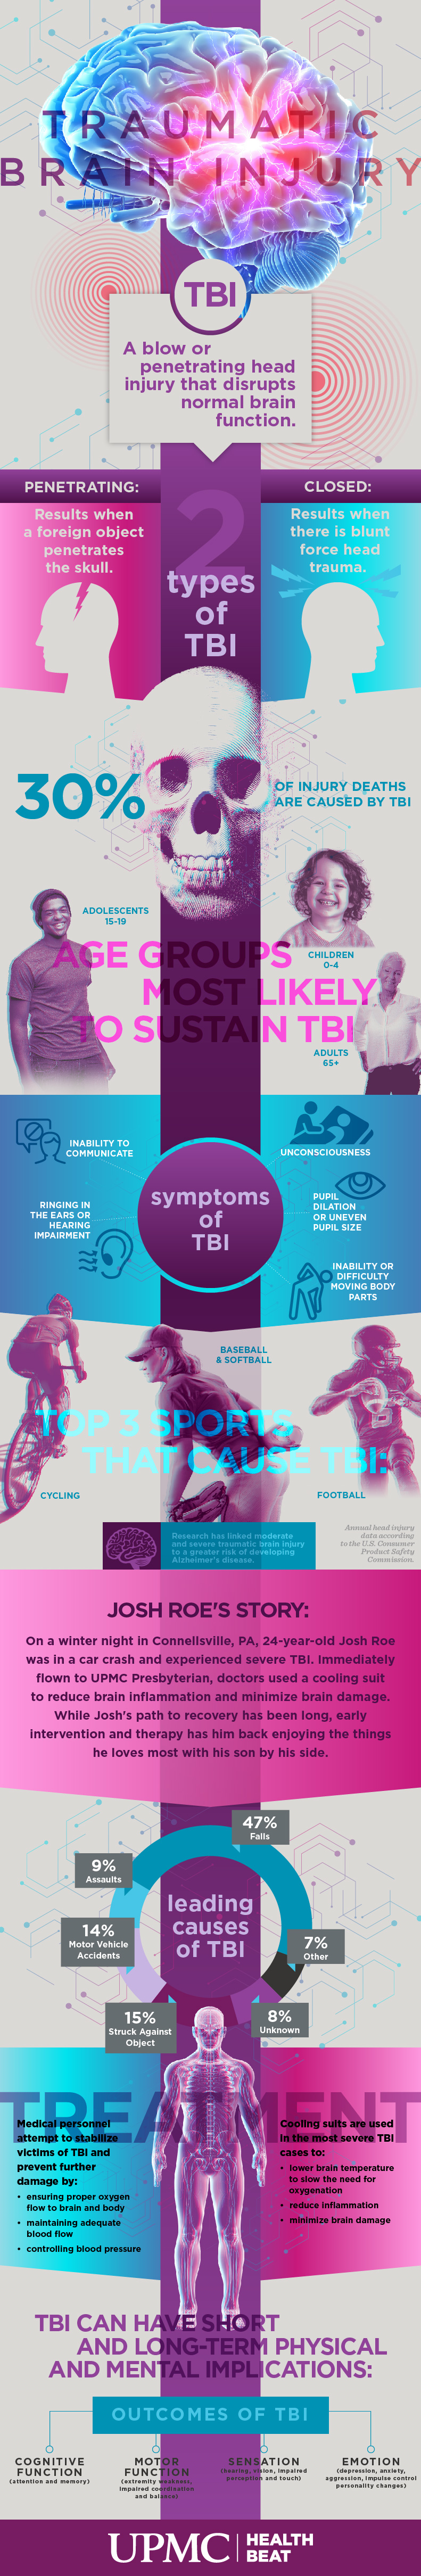 Learn more about the causes of traumatic brain injury with this infographic. 